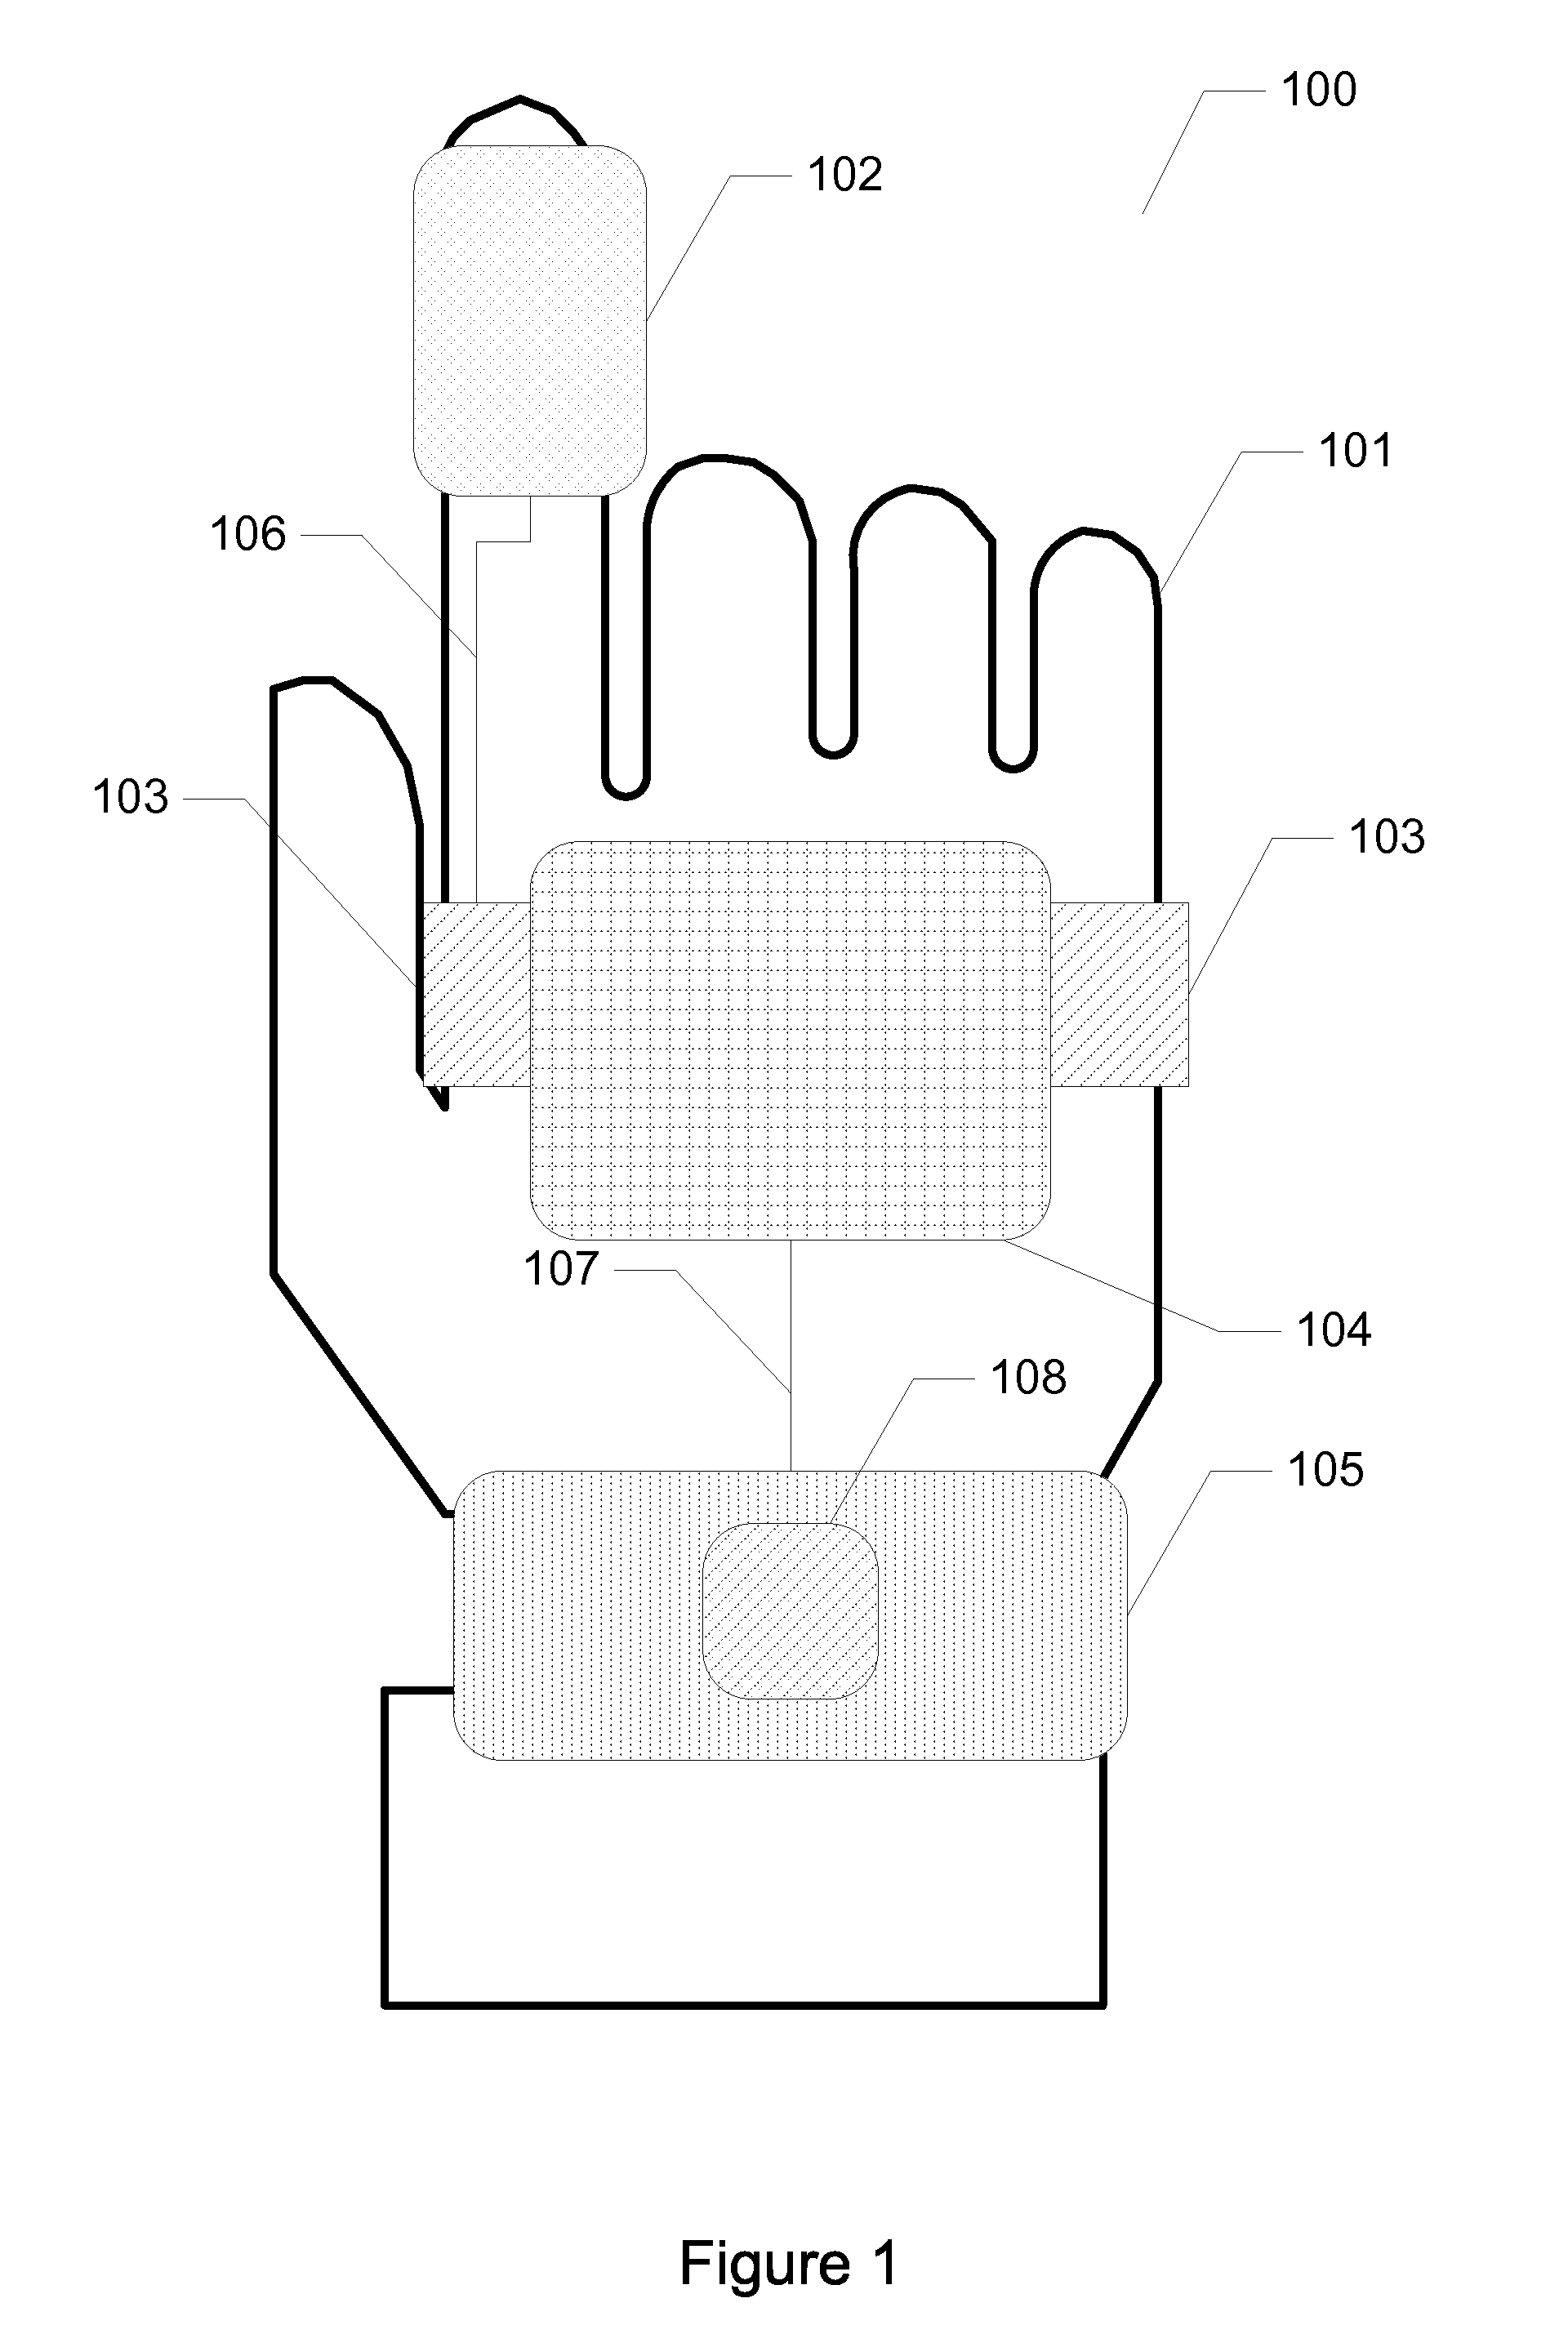 Method and Apparatus for Input Device